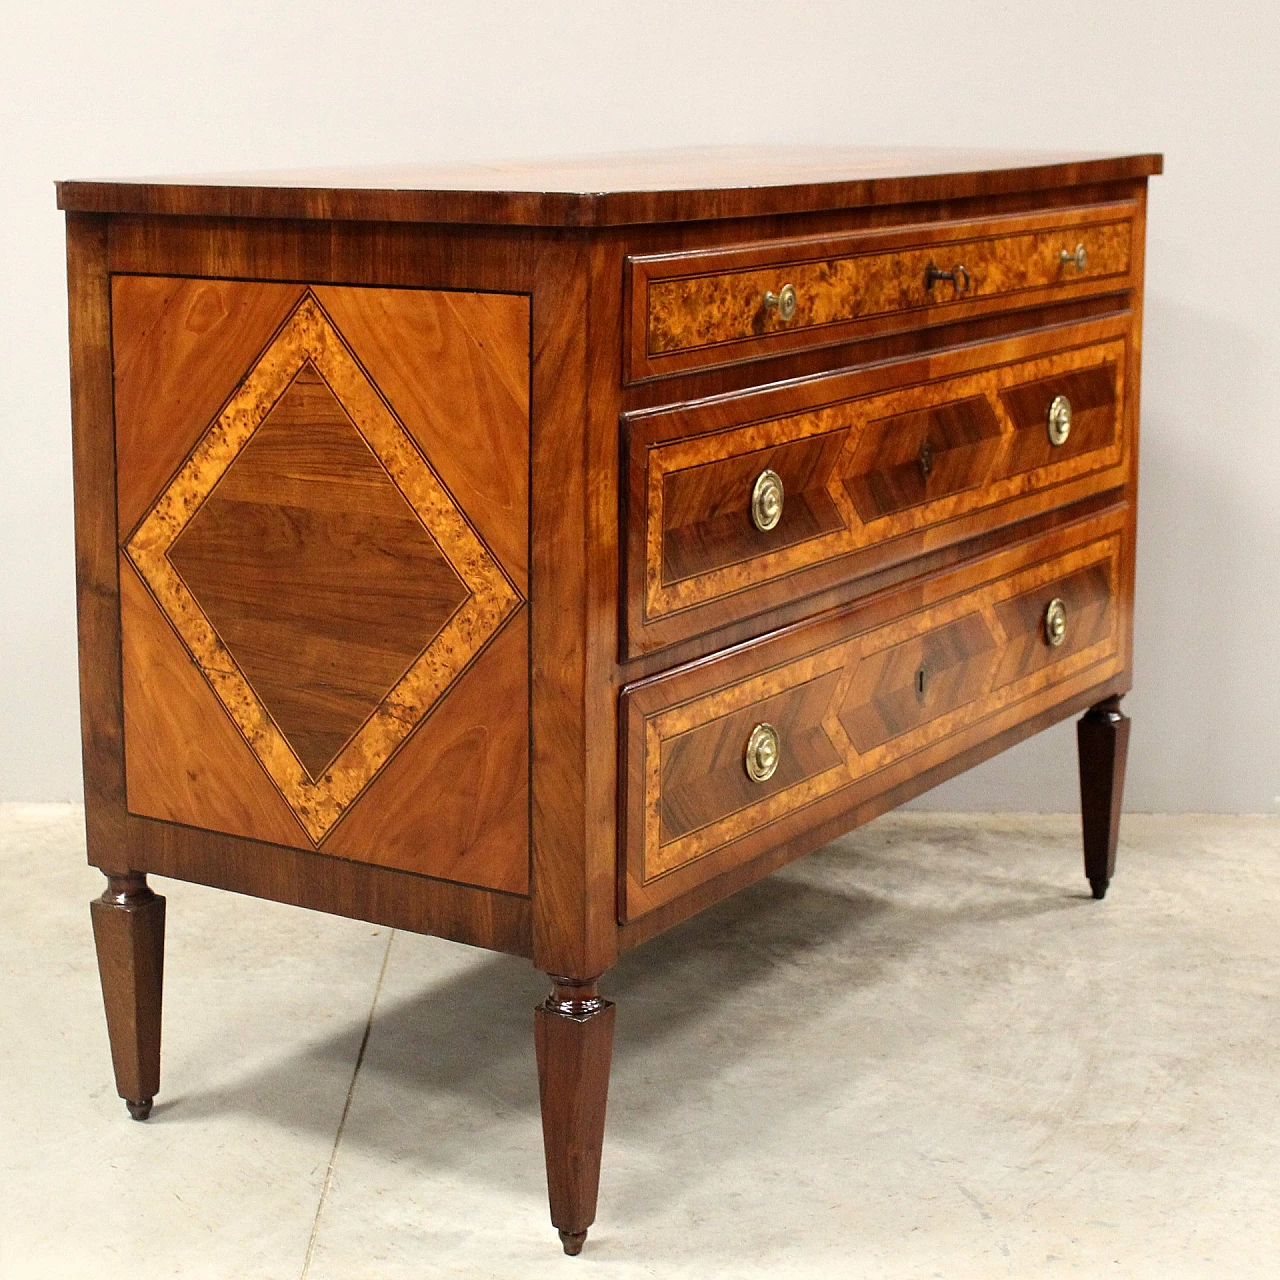 Emilian Louis XVI walnut and cherry commode with inlays, 18th century 7